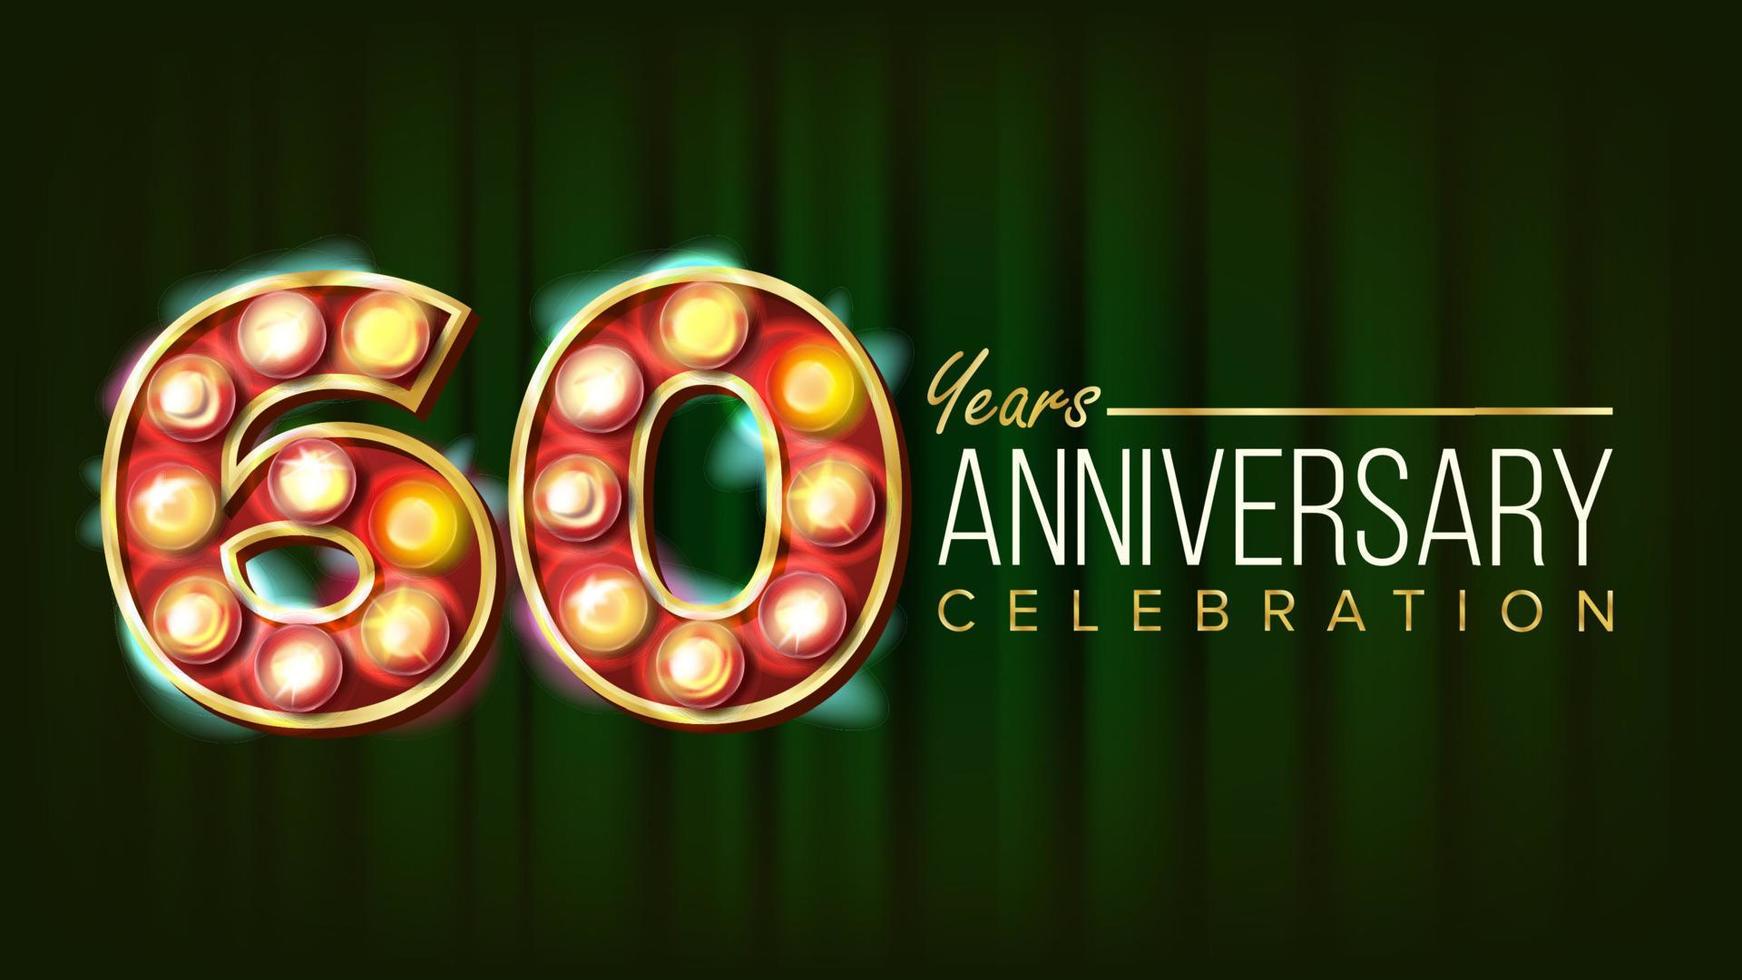 60 Years Anniversary Banner Vector. Sixty, Sixtieth Celebration. 3D Glowing Element Digits. For Flyer, Card, Wedding, Advertising Design. Classic Green Background Illustration vector